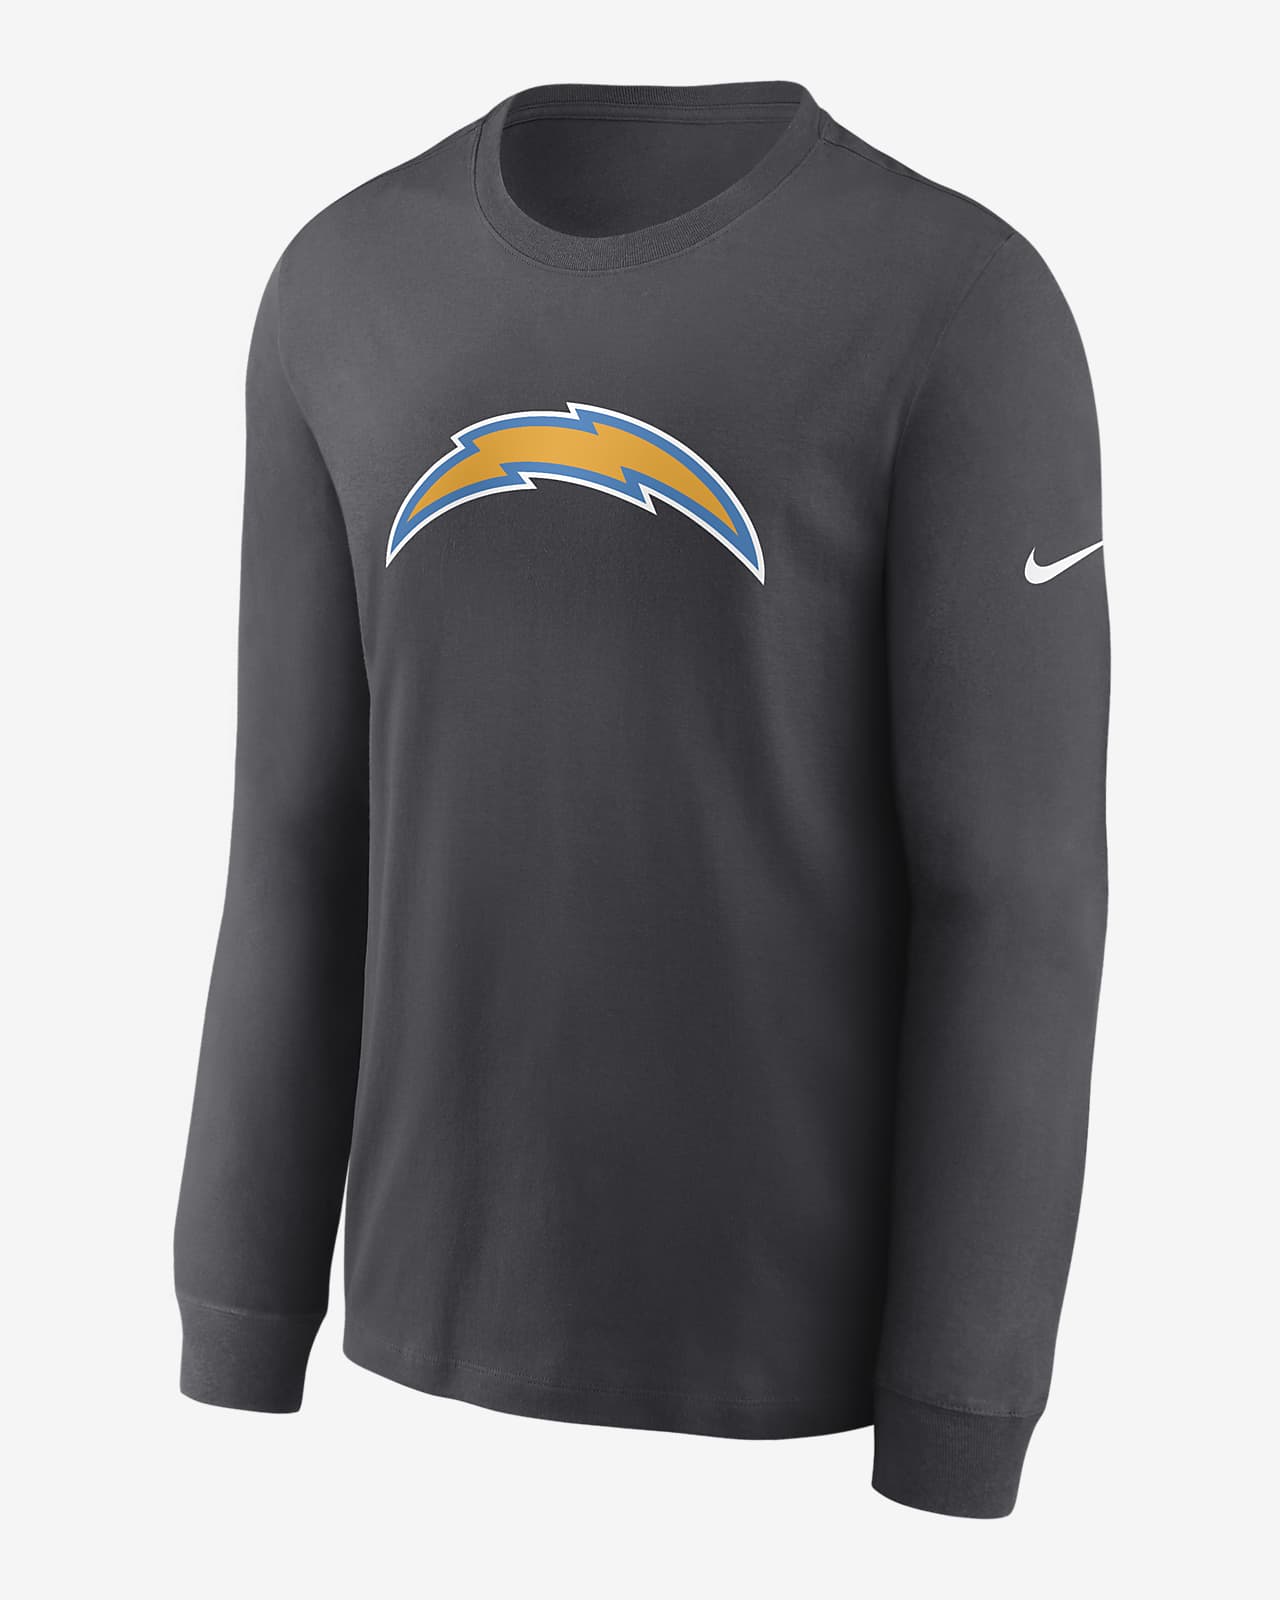 Nike Primary Logo (NFL Los Angeles Chargers) Men's Long-Sleeve T